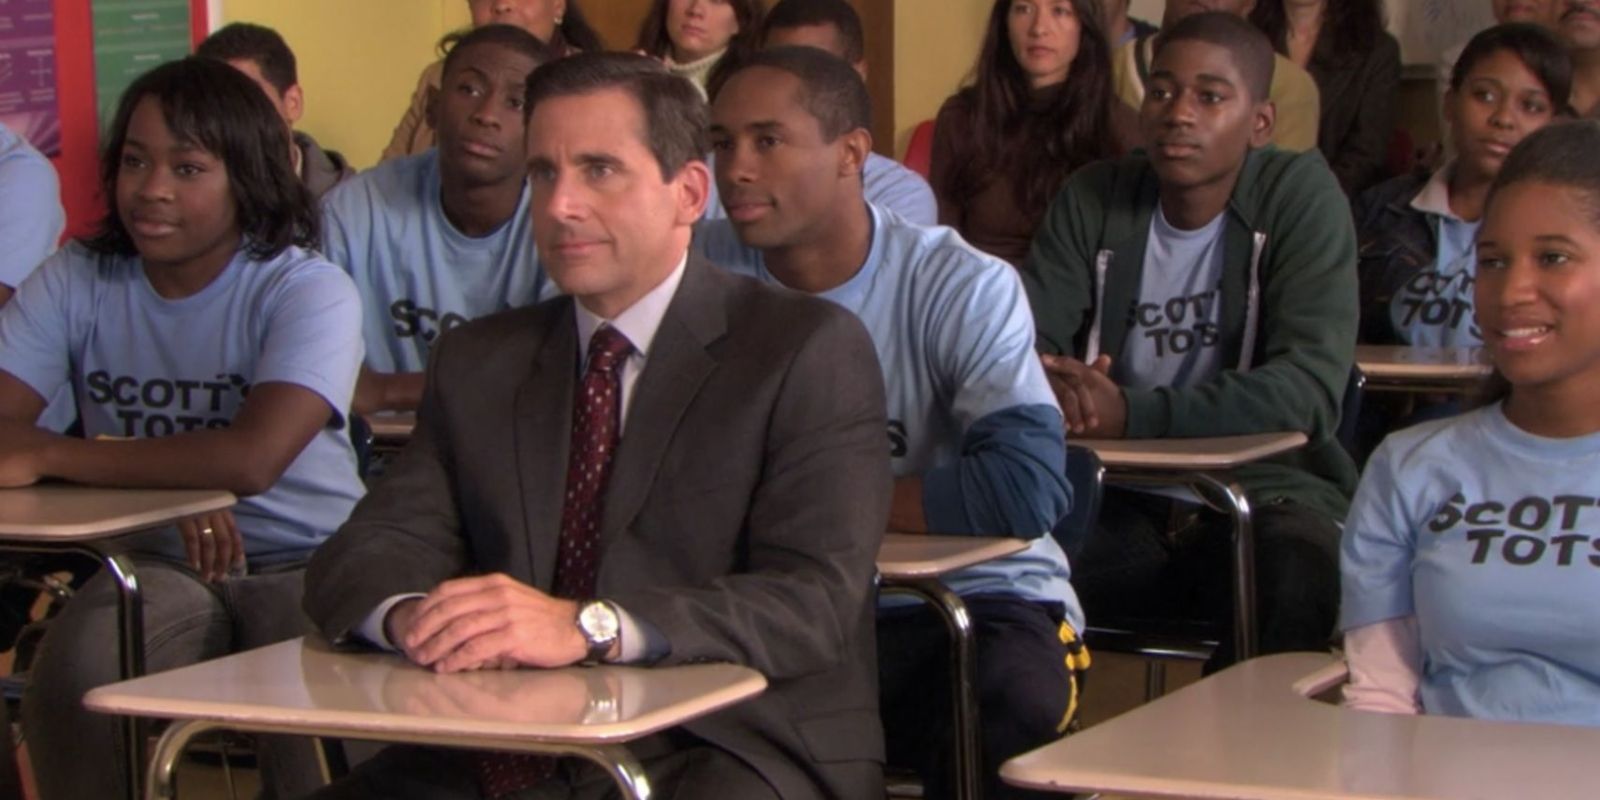 Michael Scott with Scott's Tots from The Office.